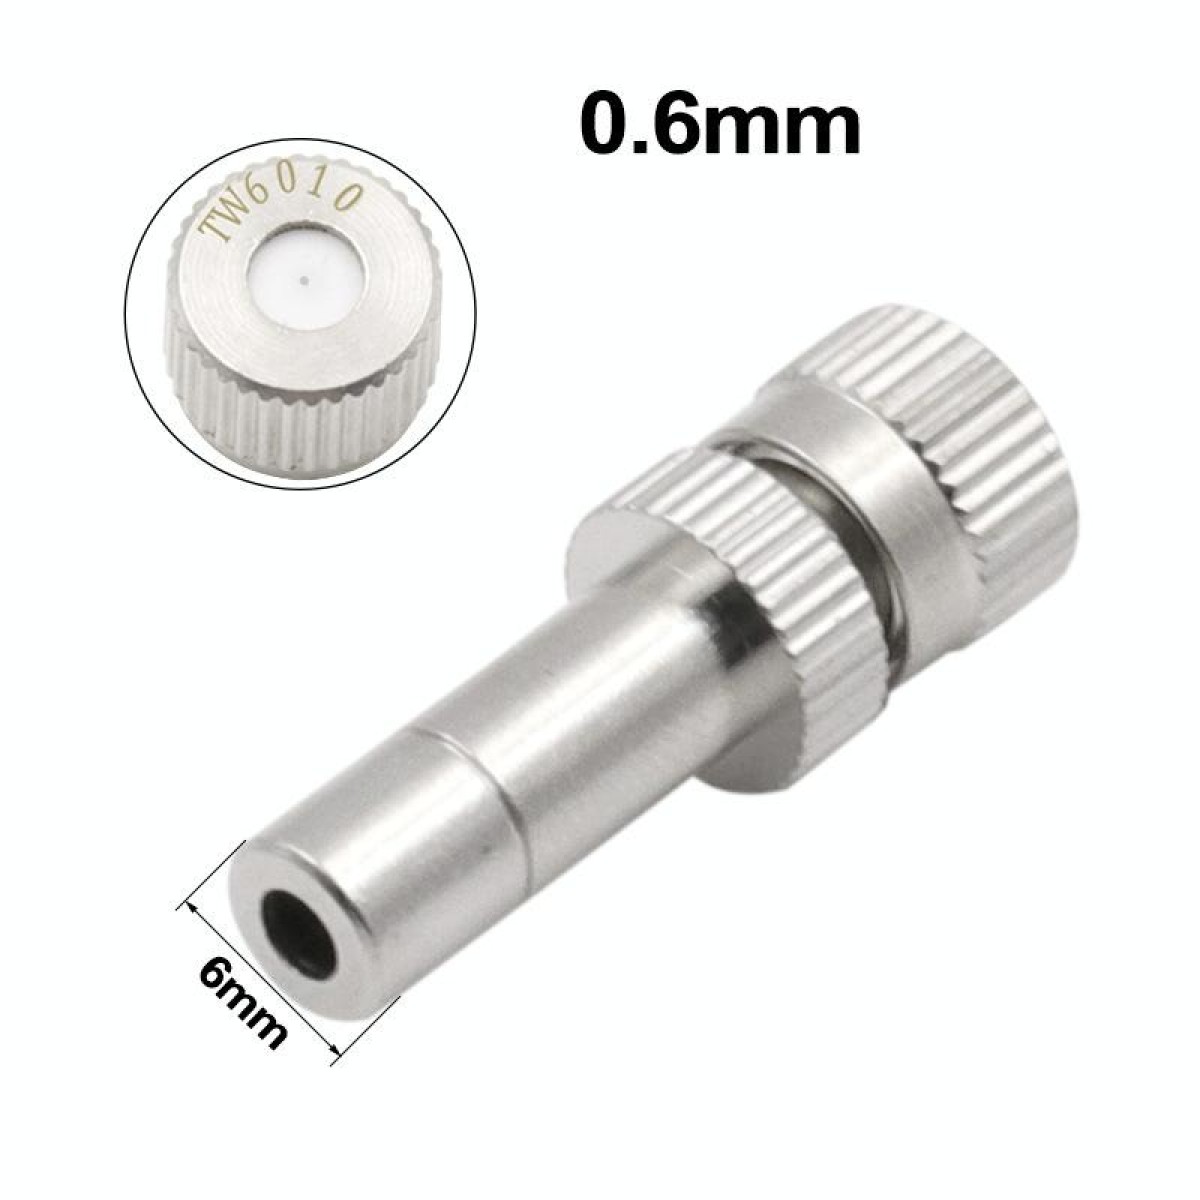 6mm Humidifying And Dedusting Cooling Atomizing Sprinkler Quick-Plug Fog Misting Nozzle, Model: 0.6mm